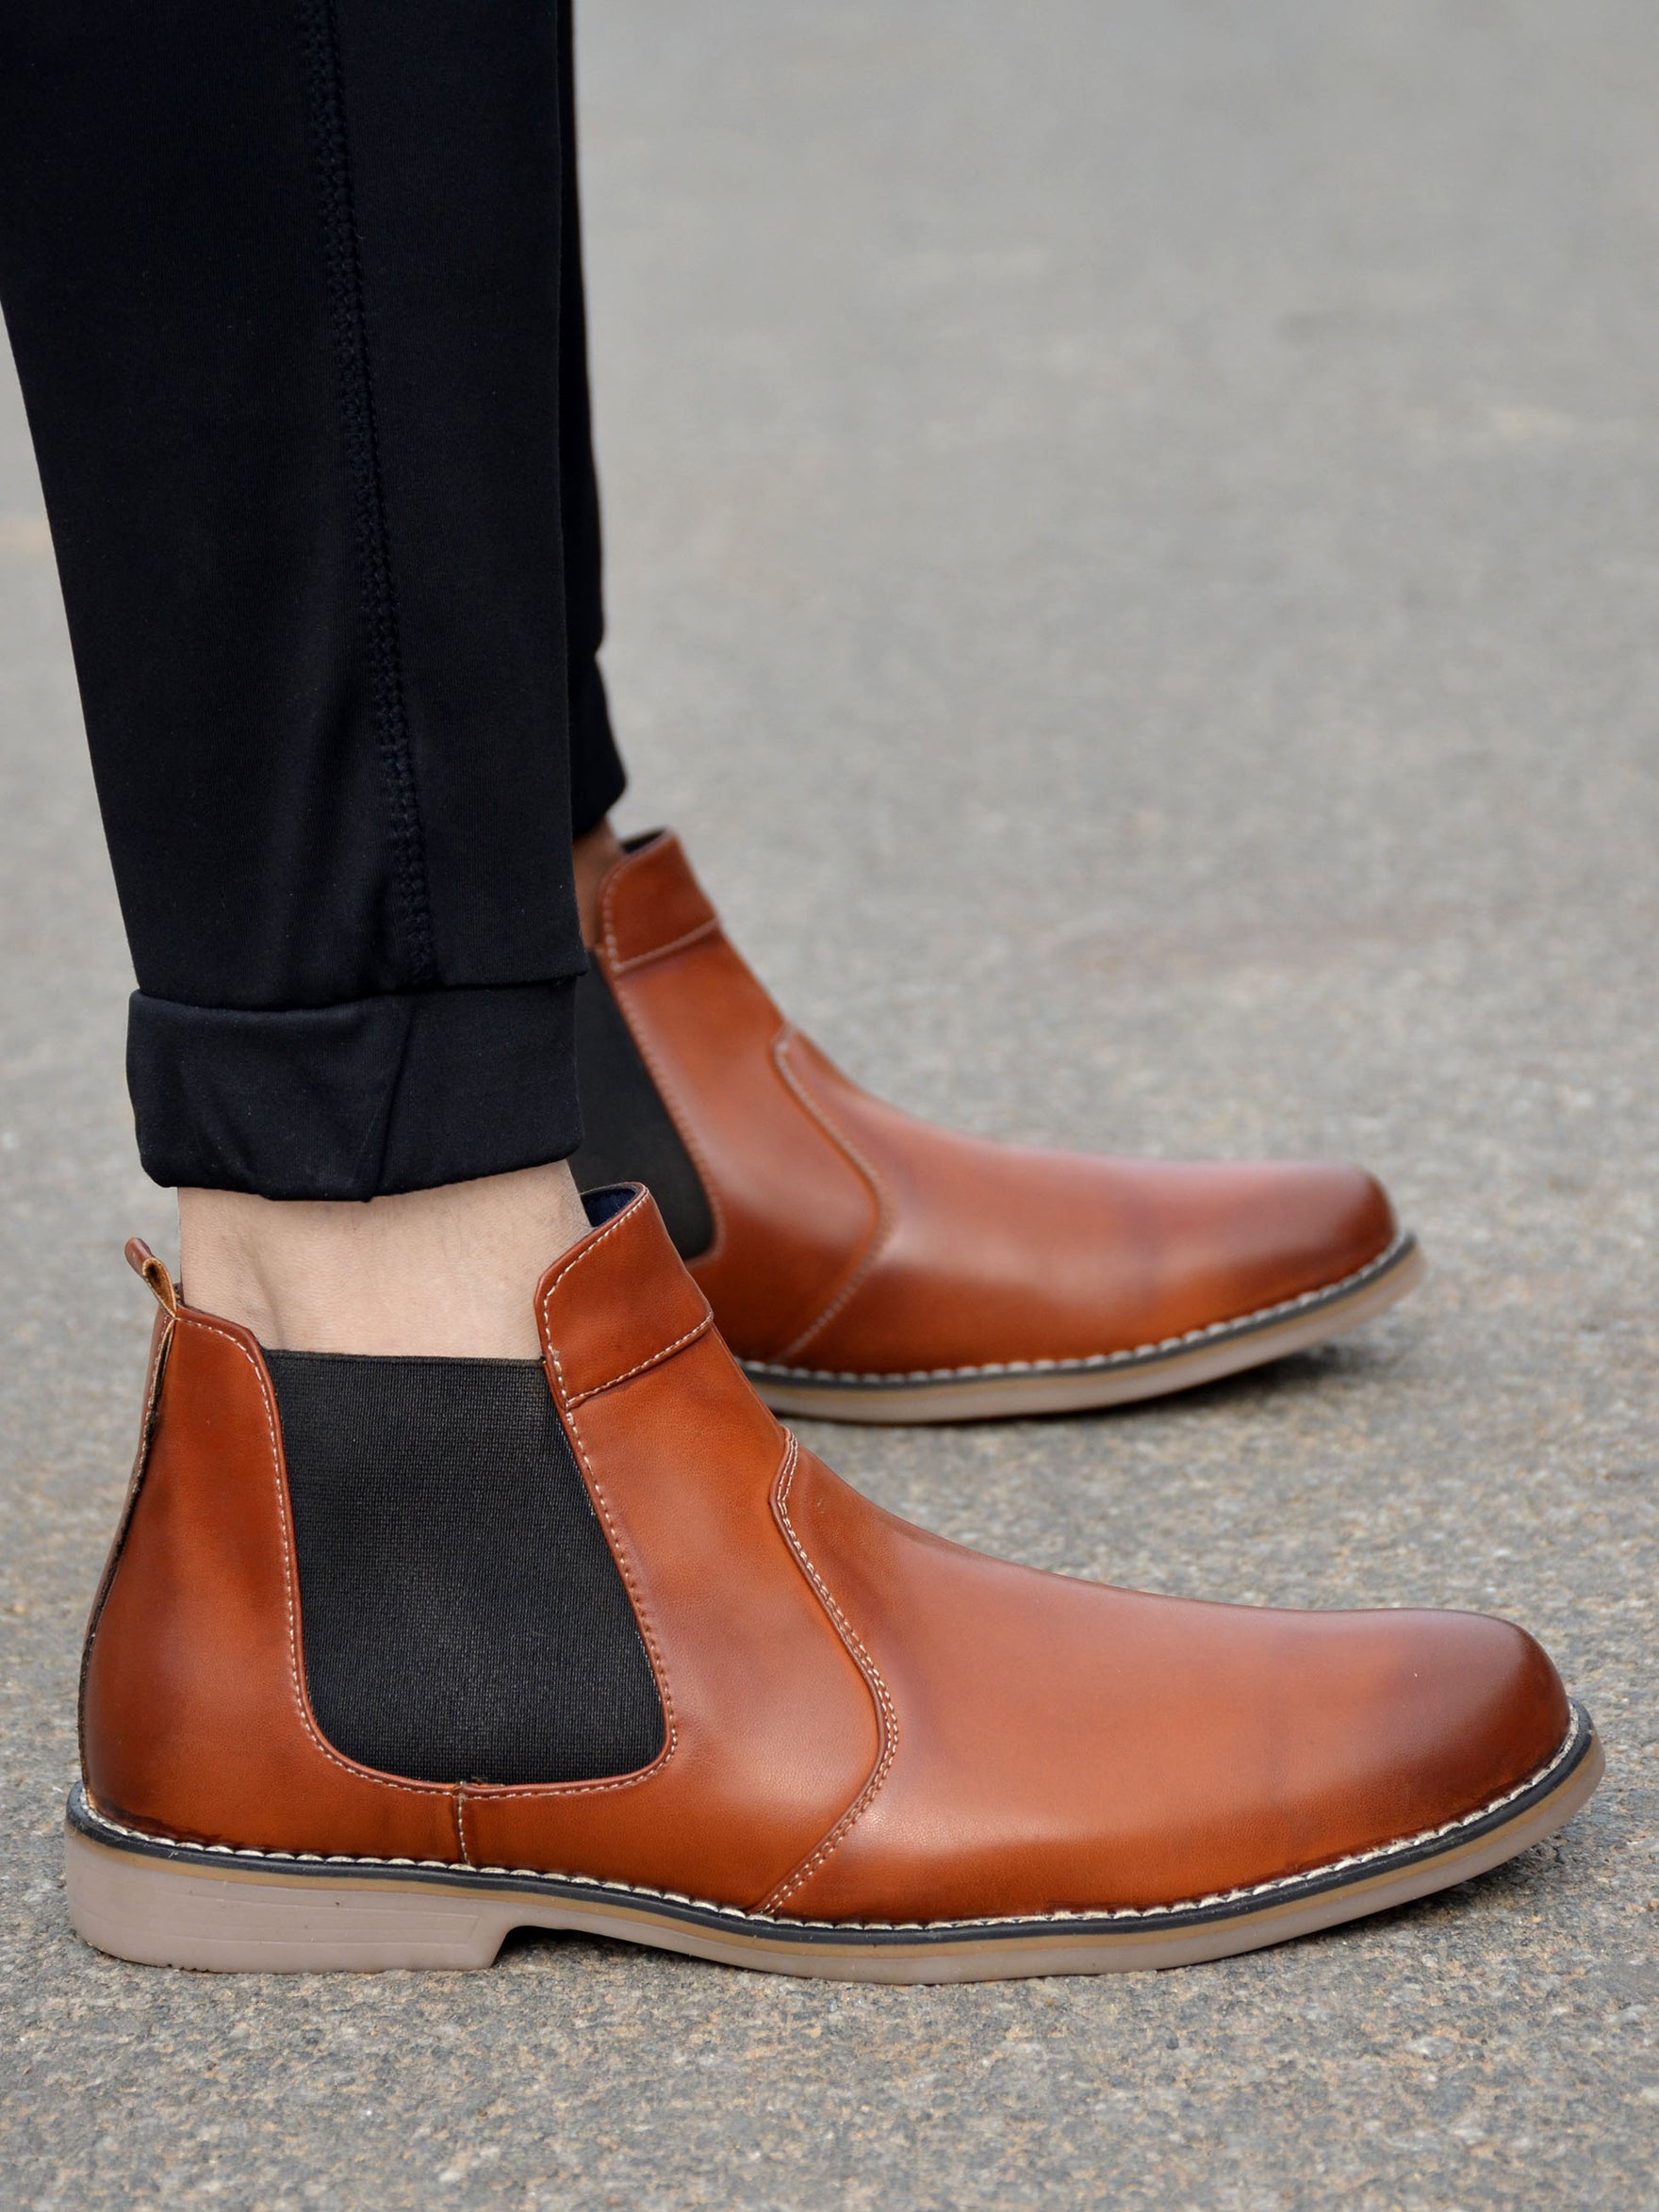 Why You Should Wear Chelsea Boots in 2021?